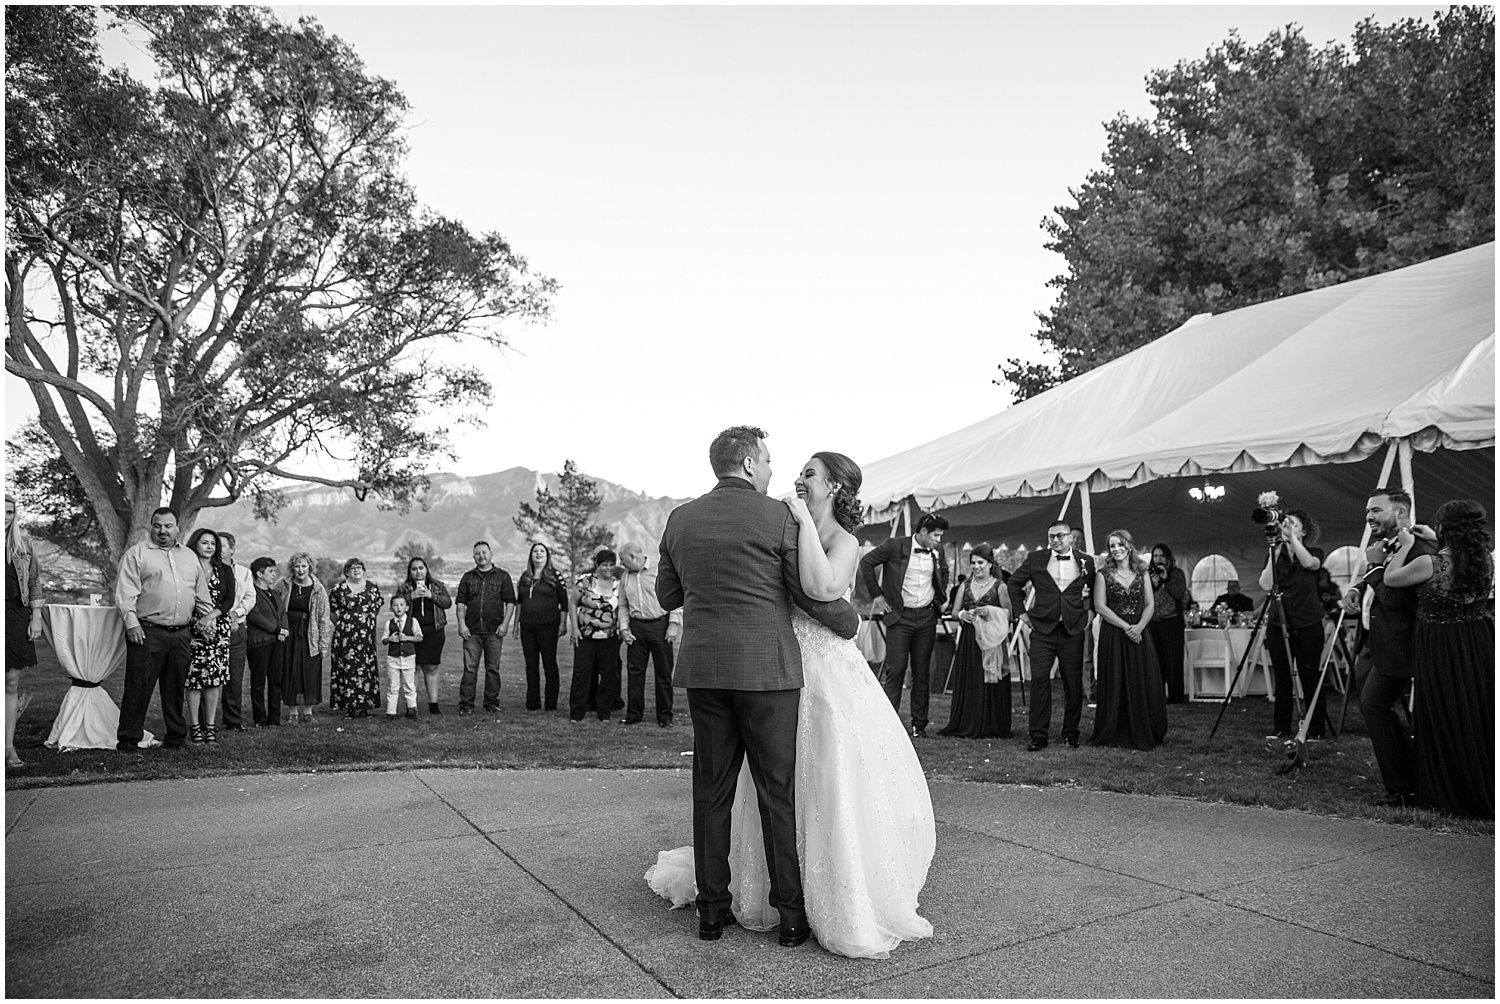 Bride and groom's first dance in front of the Sandia Mountains at Prairie Star Restaurant wedding reception